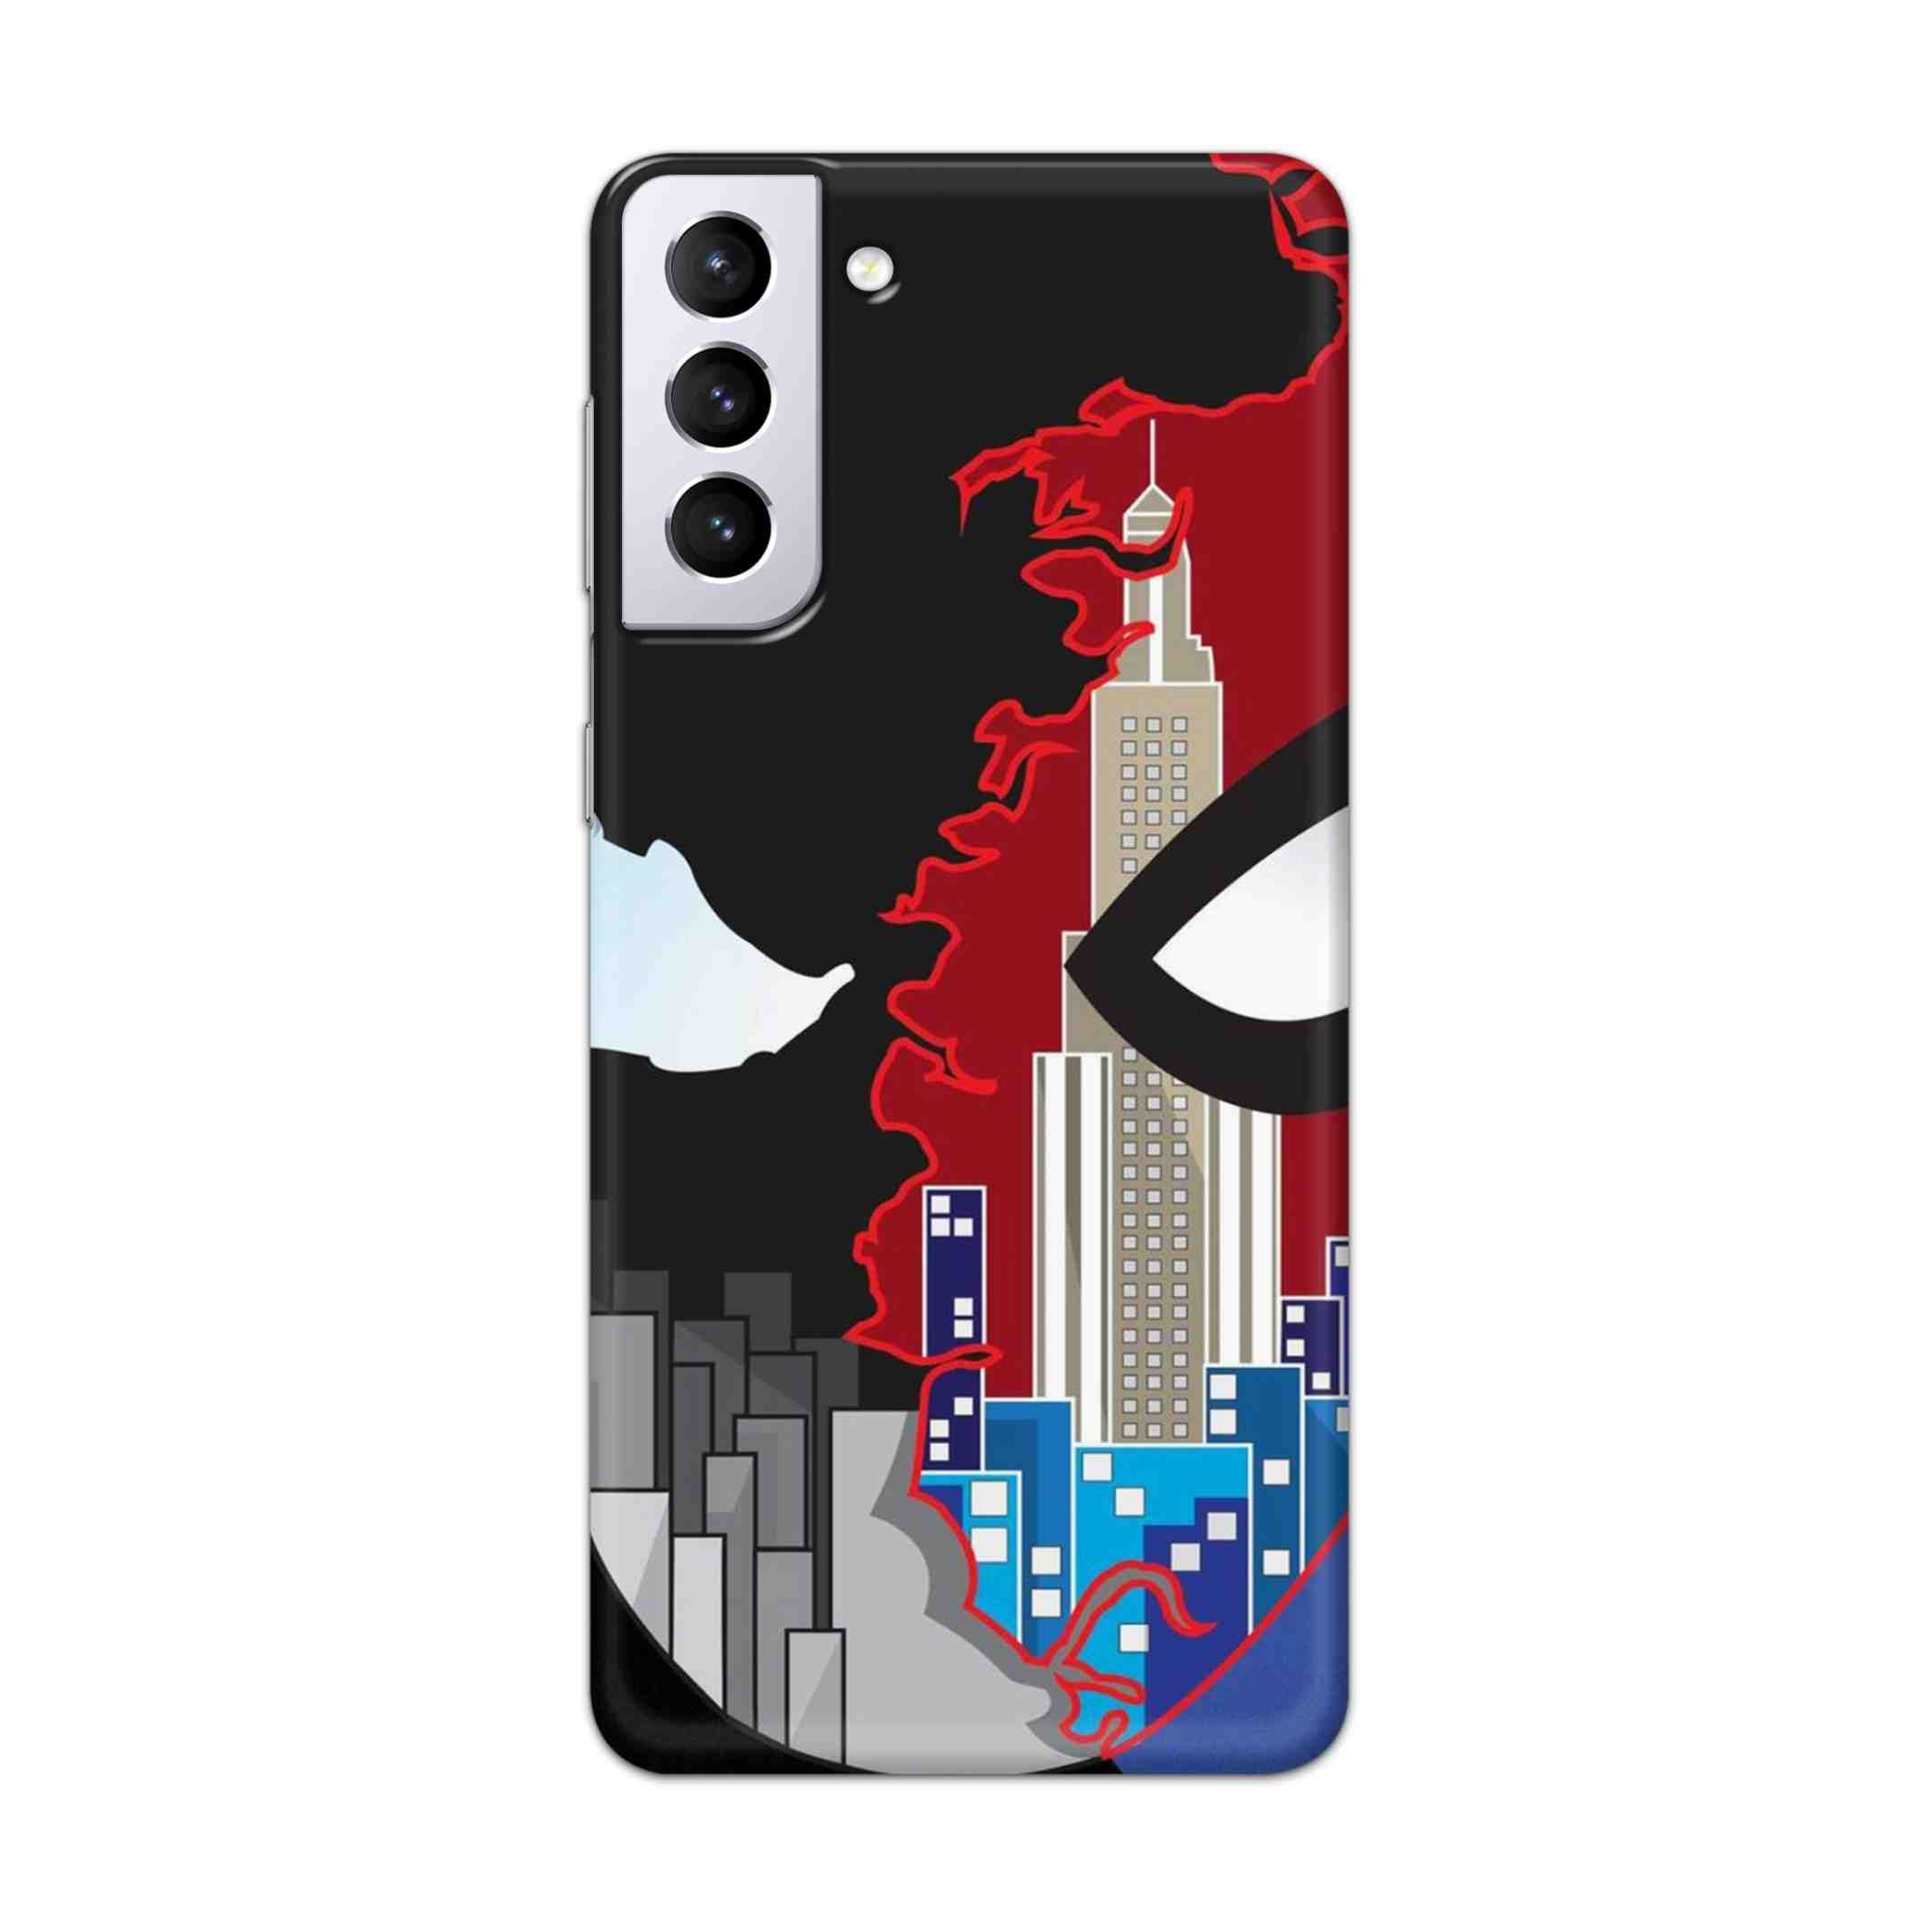 Buy Red And Black Spiderman Hard Back Mobile Phone Case Cover For Samsung Galaxy S21 Plus Online